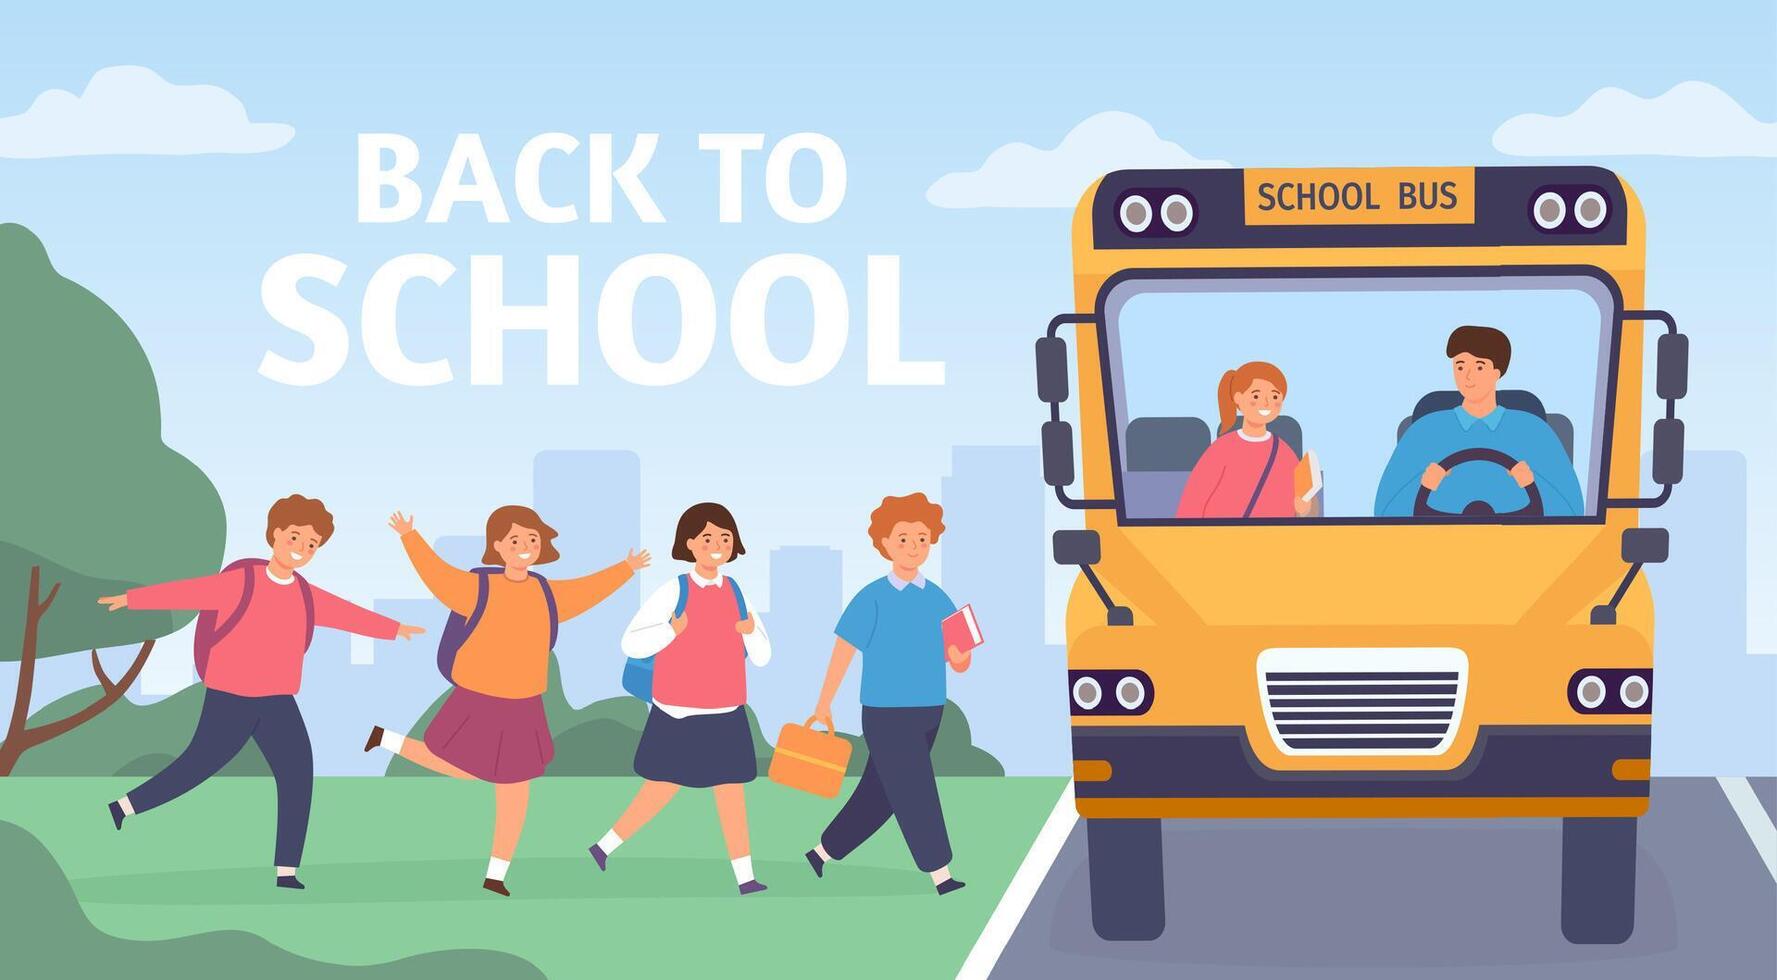 Kids ride to school. Group of elementary students board bus with driver. Cartoon preschool children road trip back to school vector concept